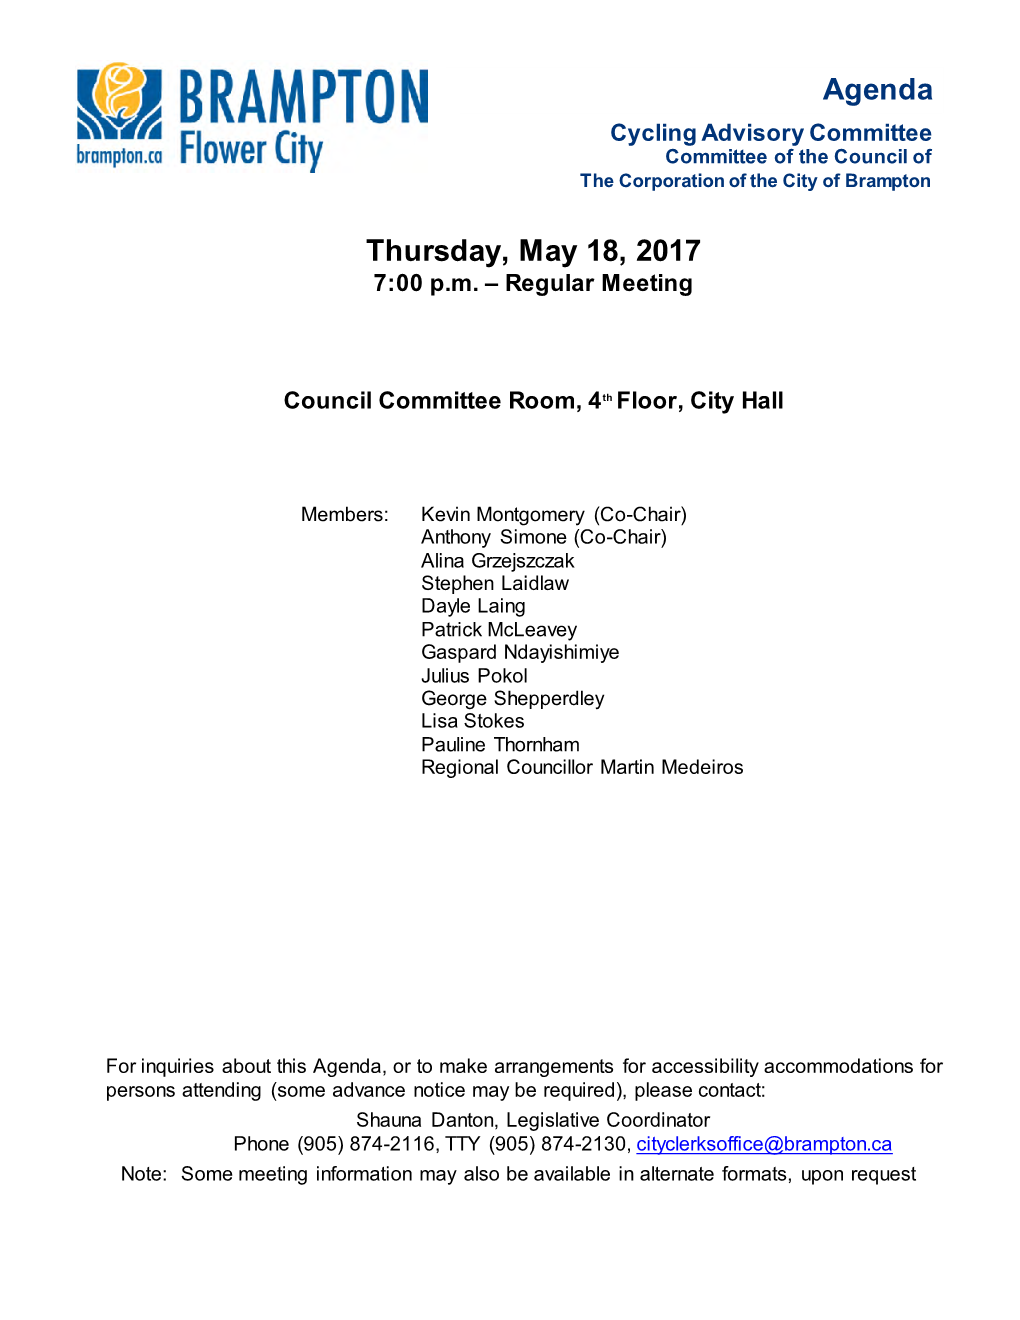 Cycling Advisory Committee Agenda for May 18, 2017